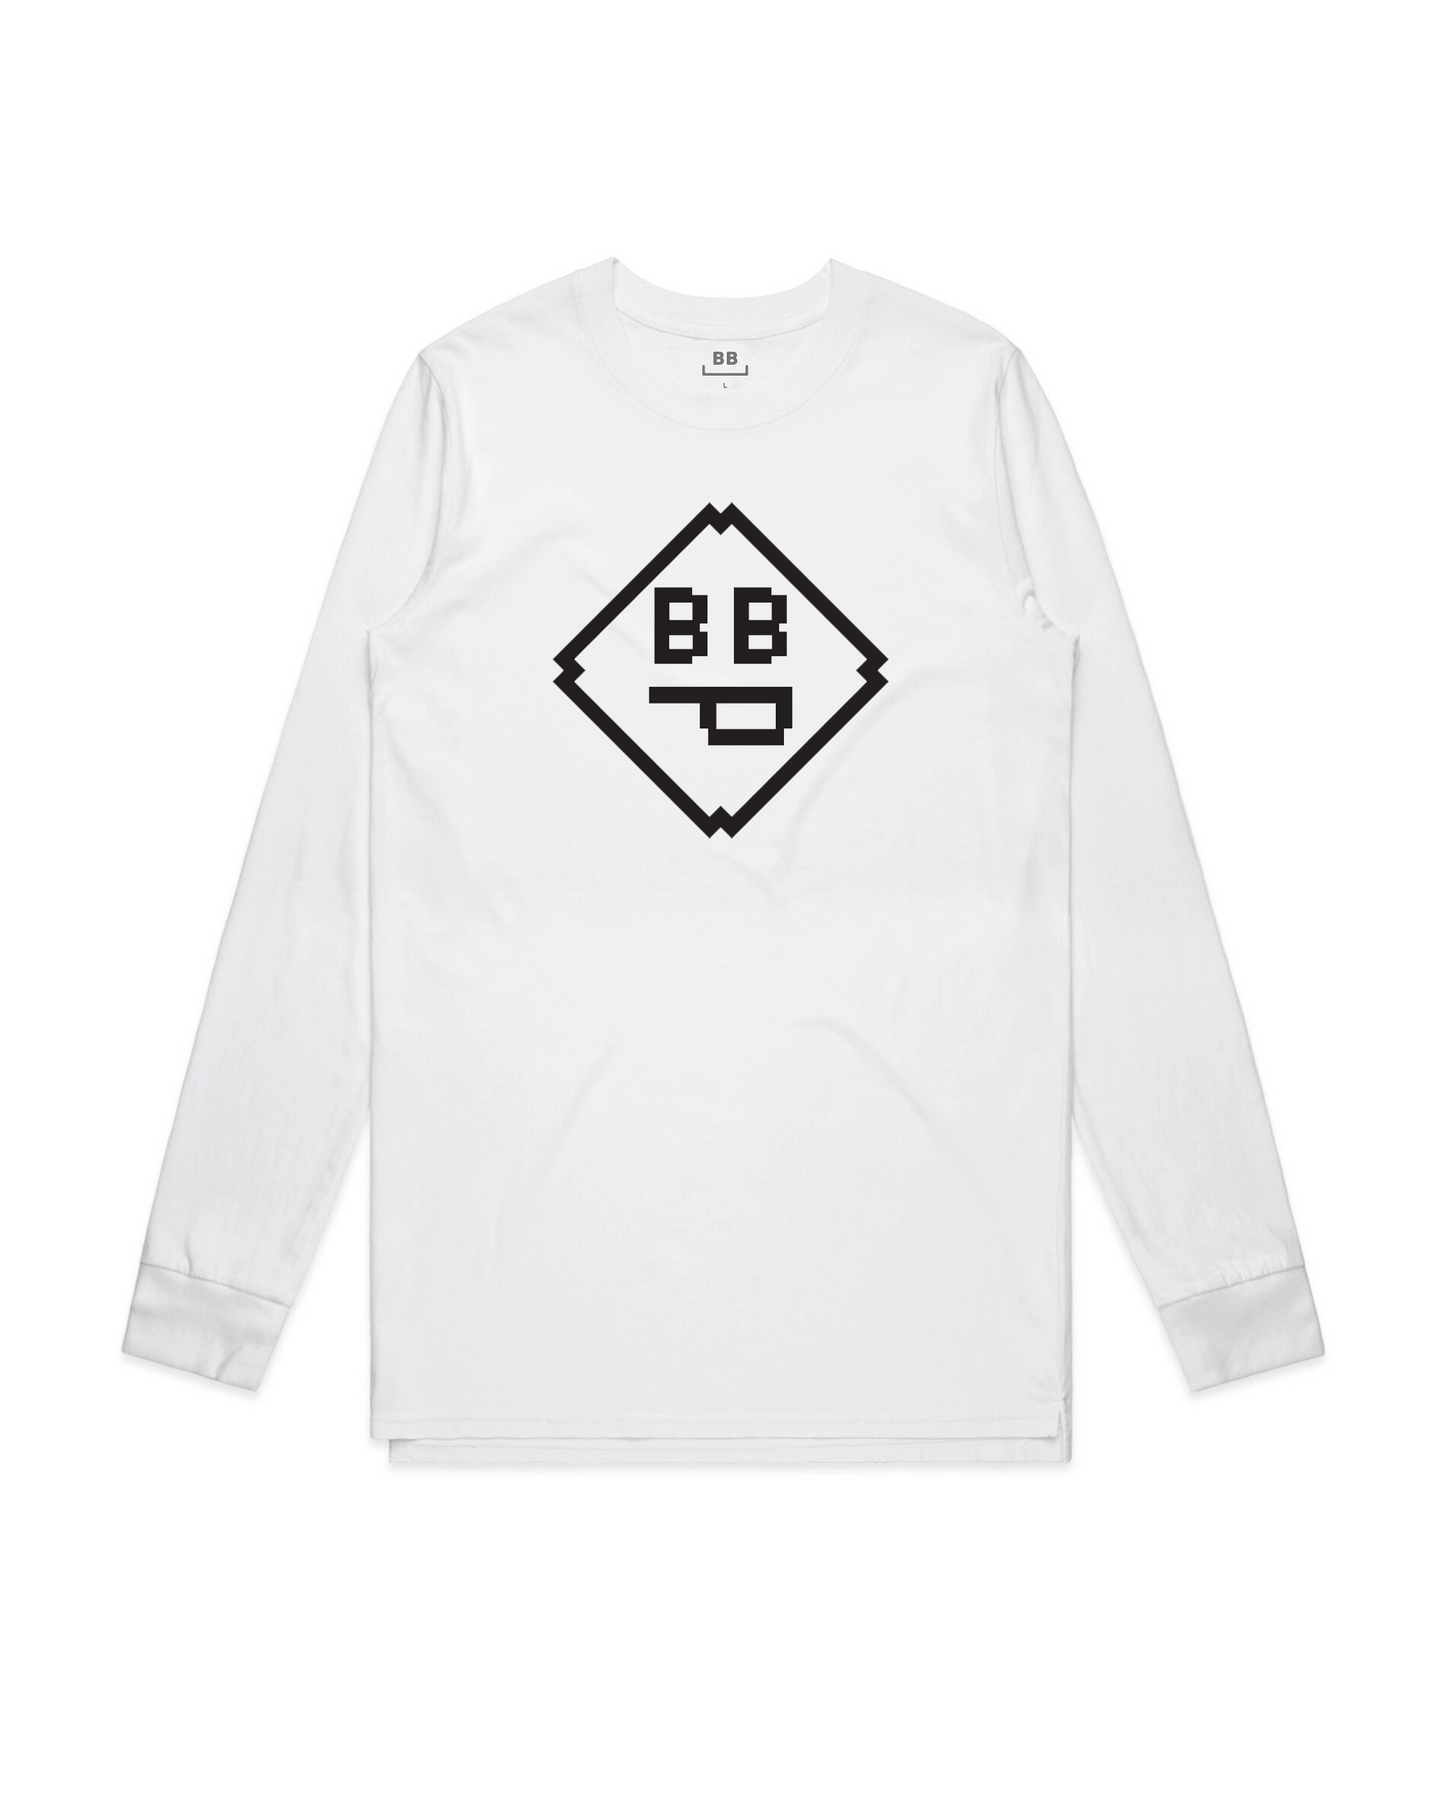 COUNT CRAZY L/S Tee White